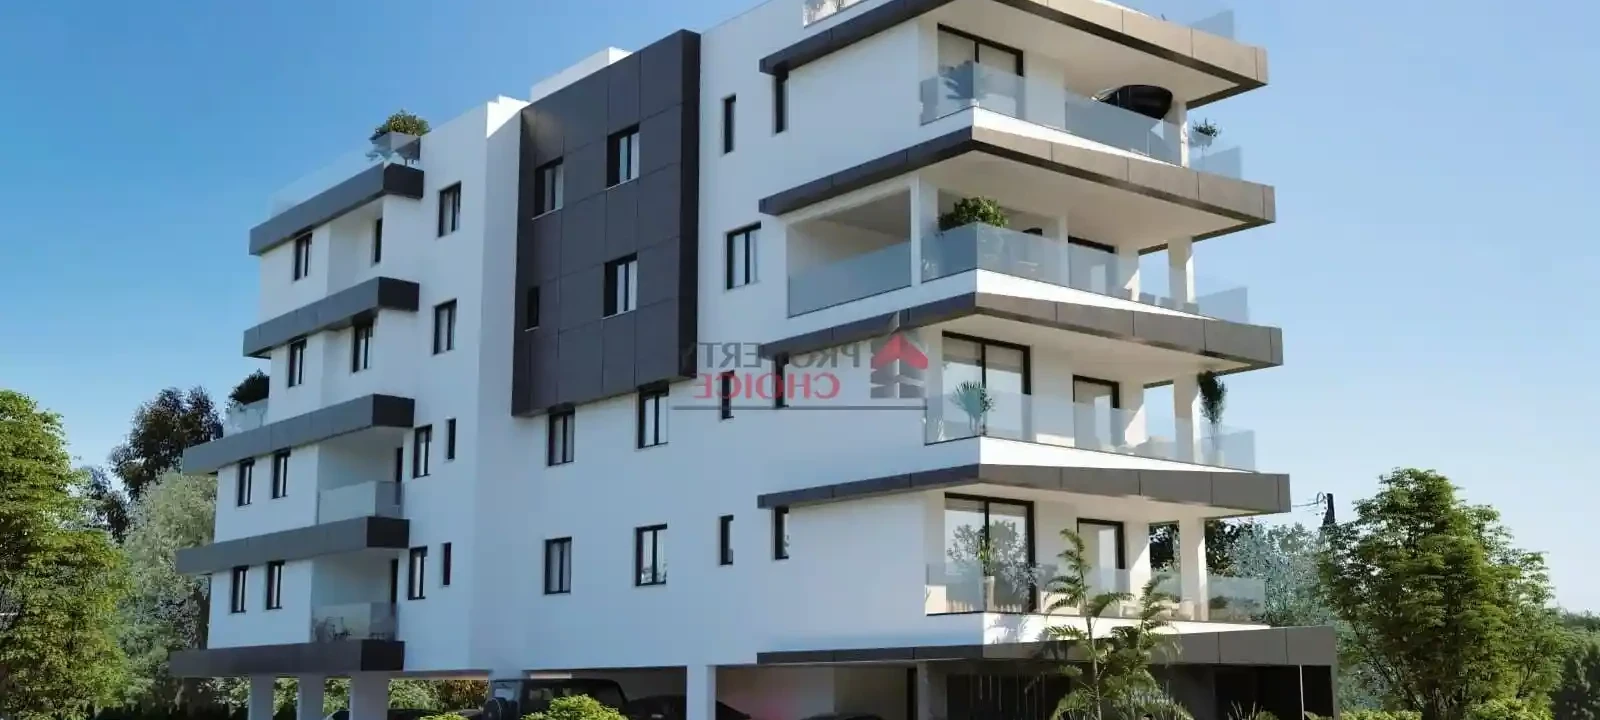 1-bedroom apartment fоr sаle €155.000, image 1